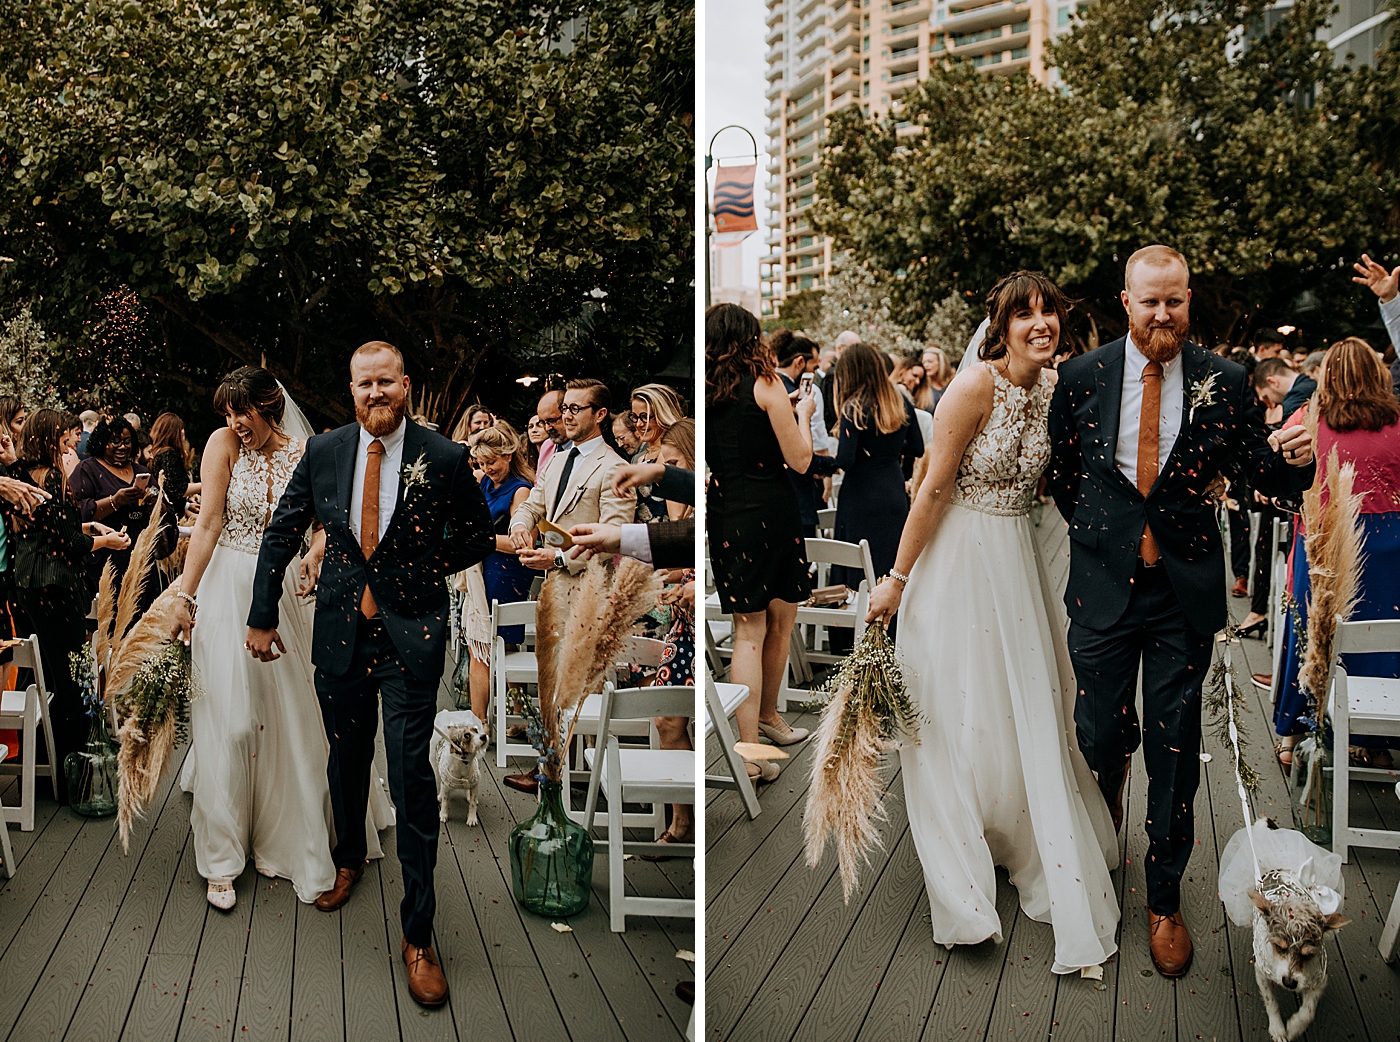 Bride and Groom exiting Ceremony with dog Historic Stranahan House Wedding Photography captured by South Florida Wedding Photographer Maggie Alvarez Photography